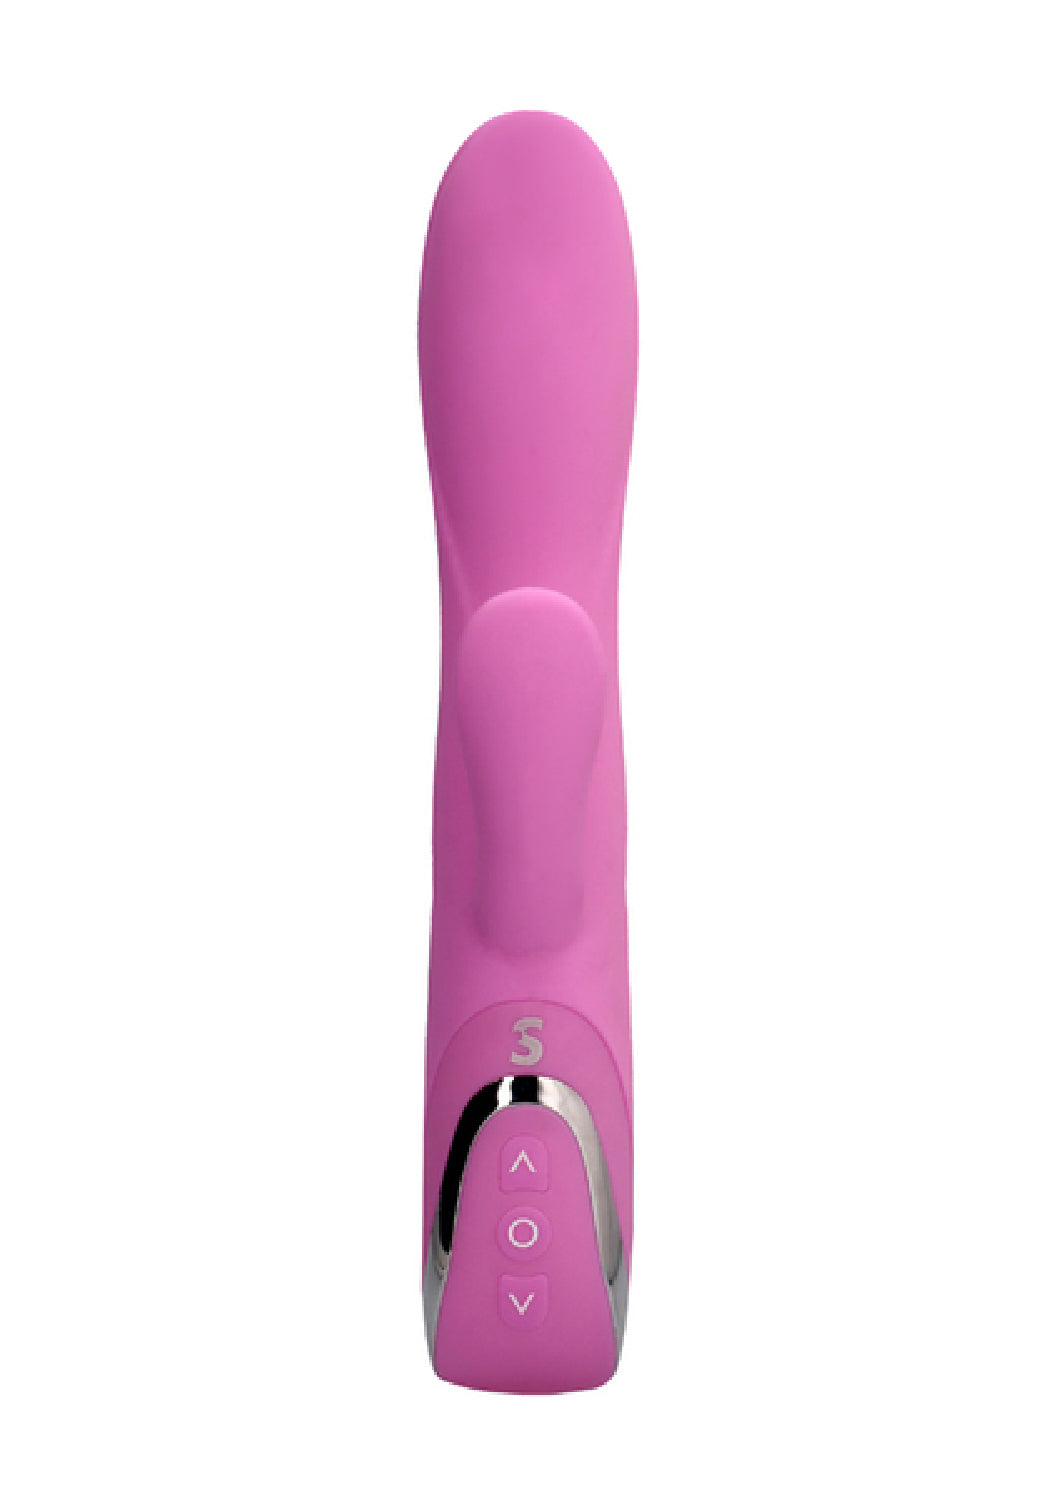 Camille Rechargeable Dual Motor G-Spot Vibrator  - Club X